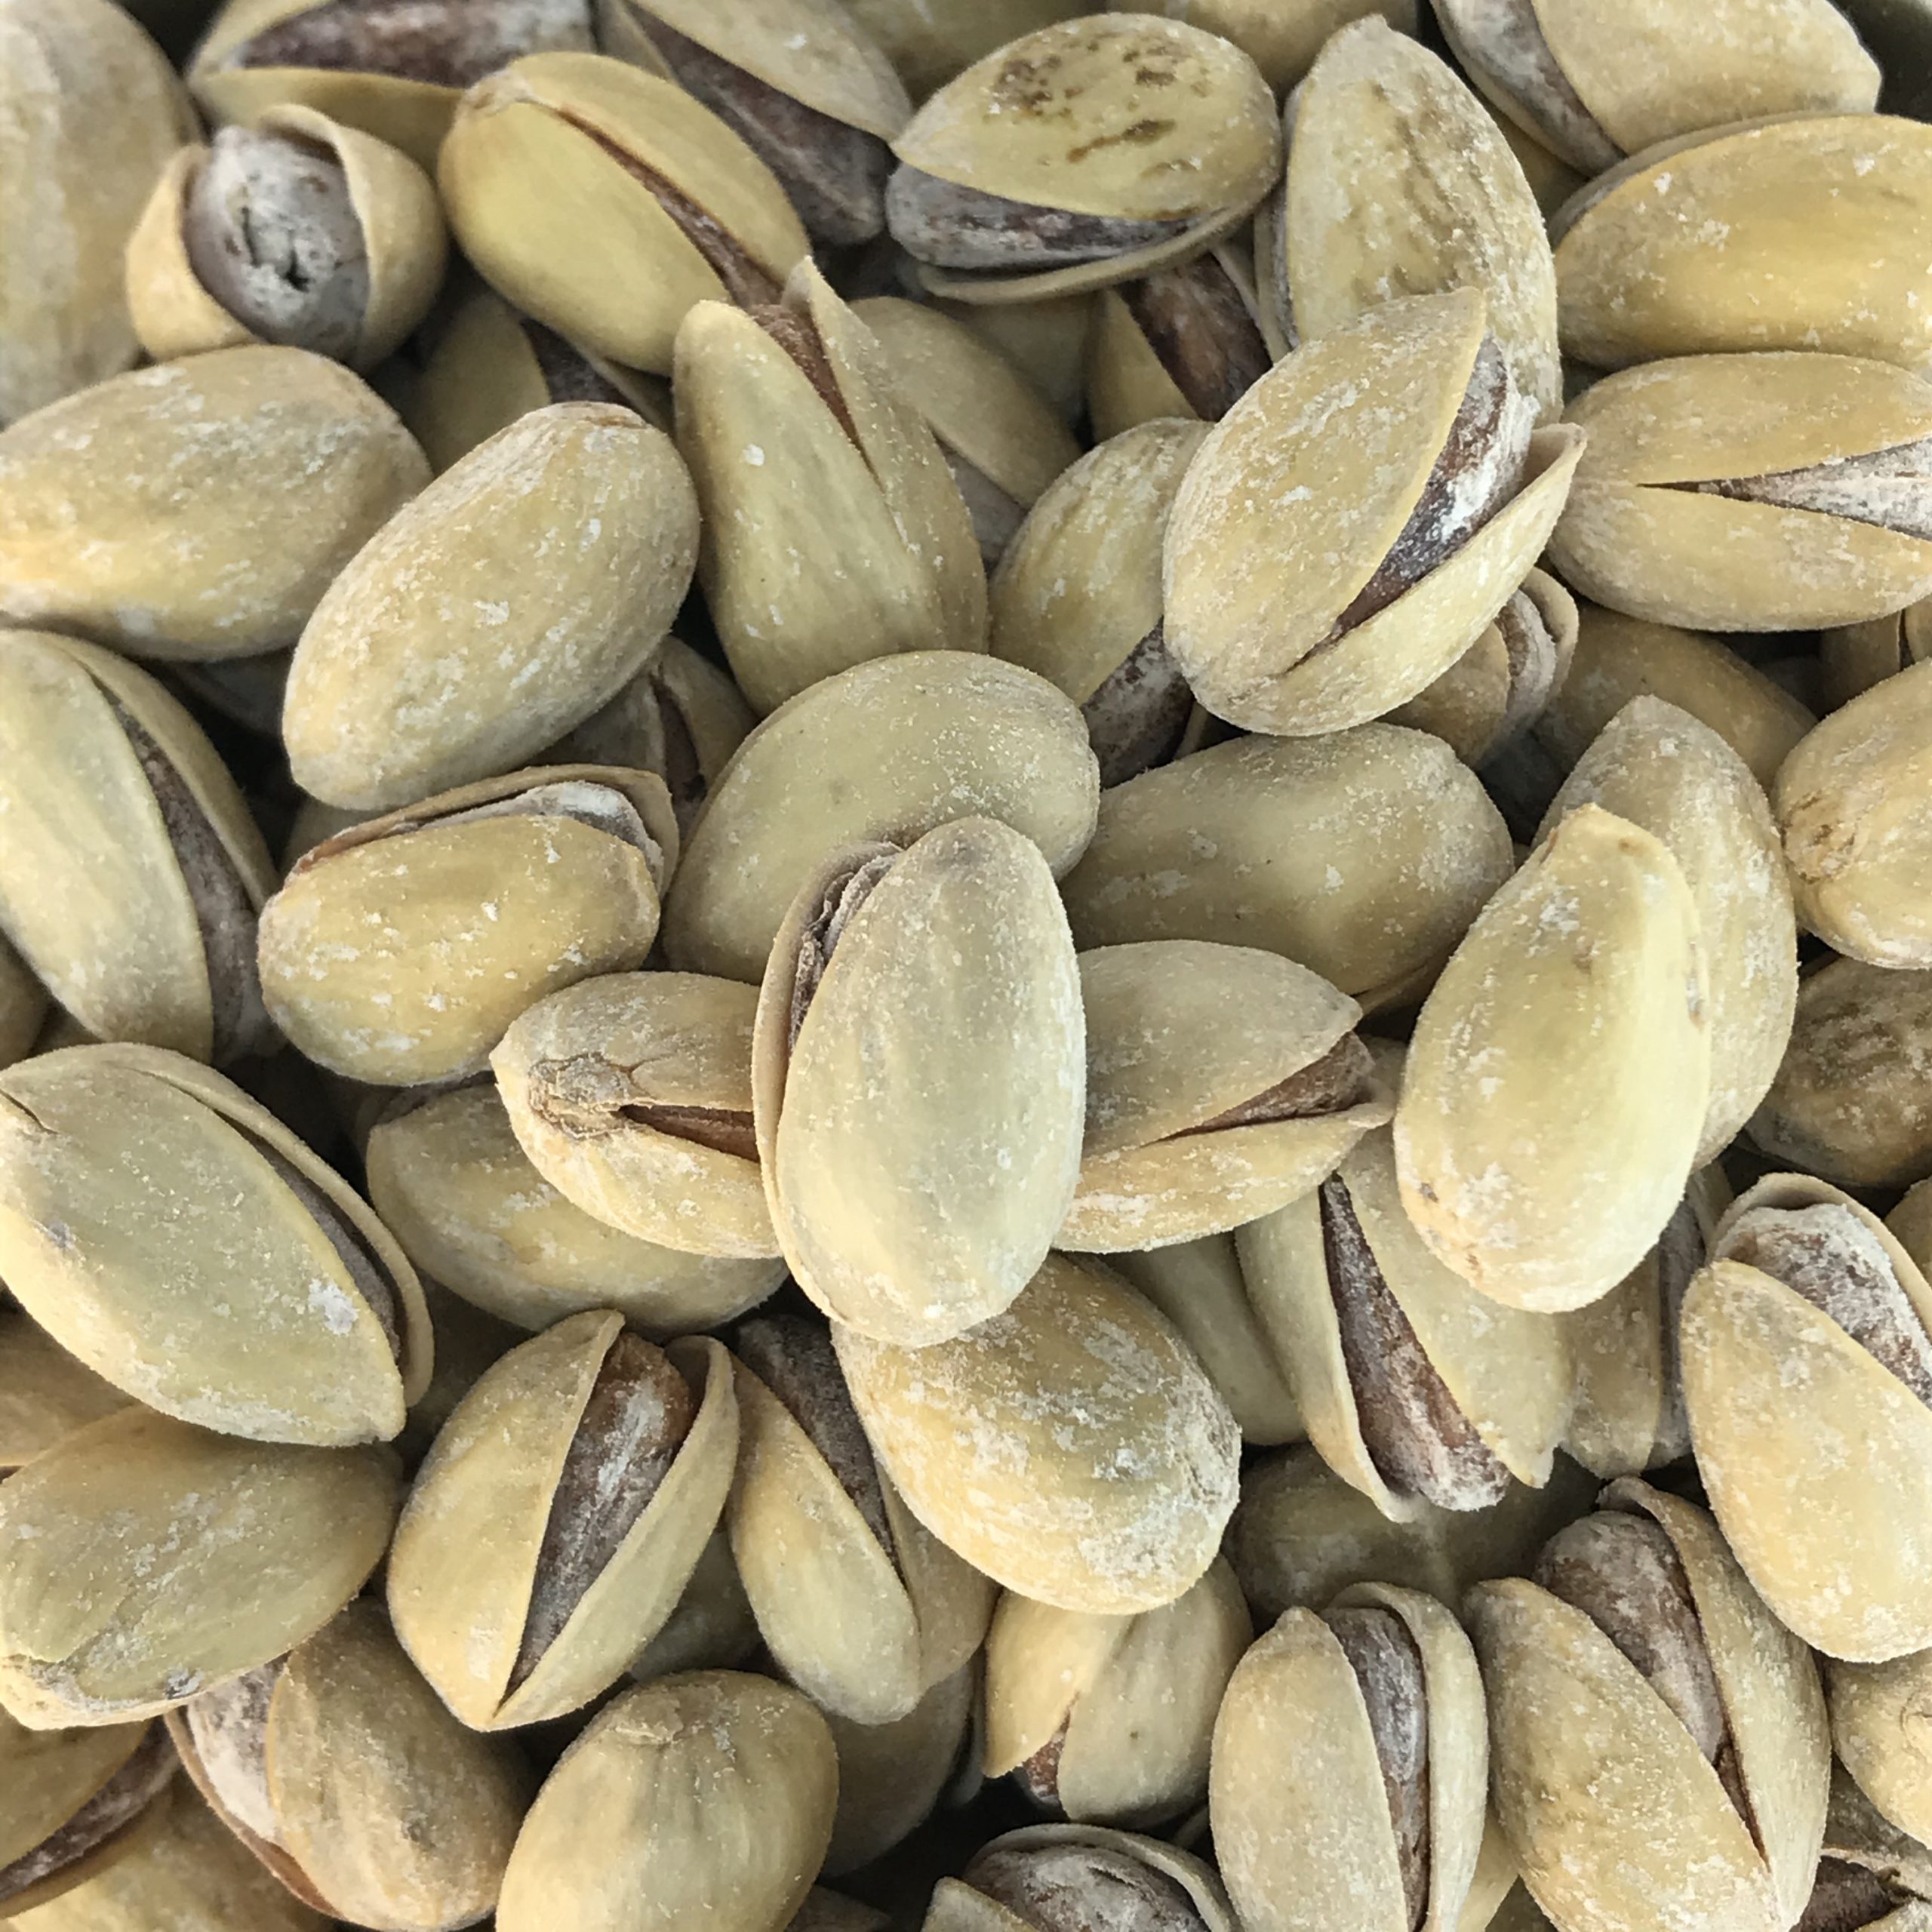 Wholesale center for salted pistachios